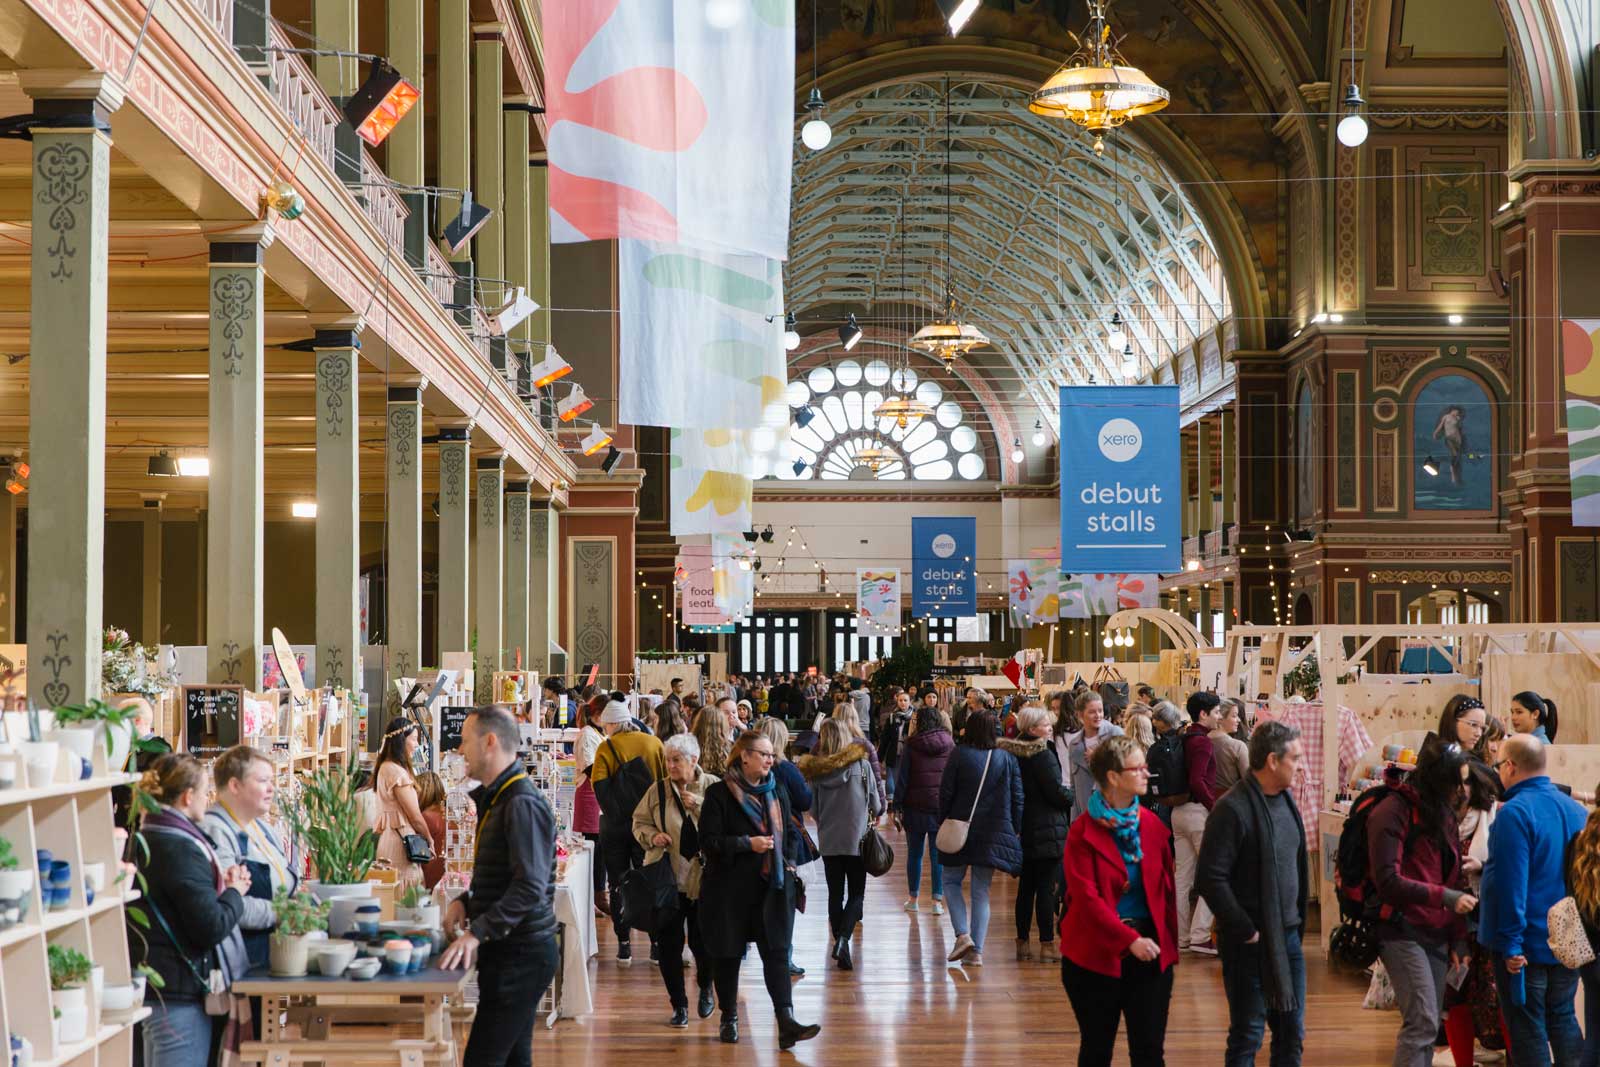 The Finders Keepers market the the Royal Exhibition Building